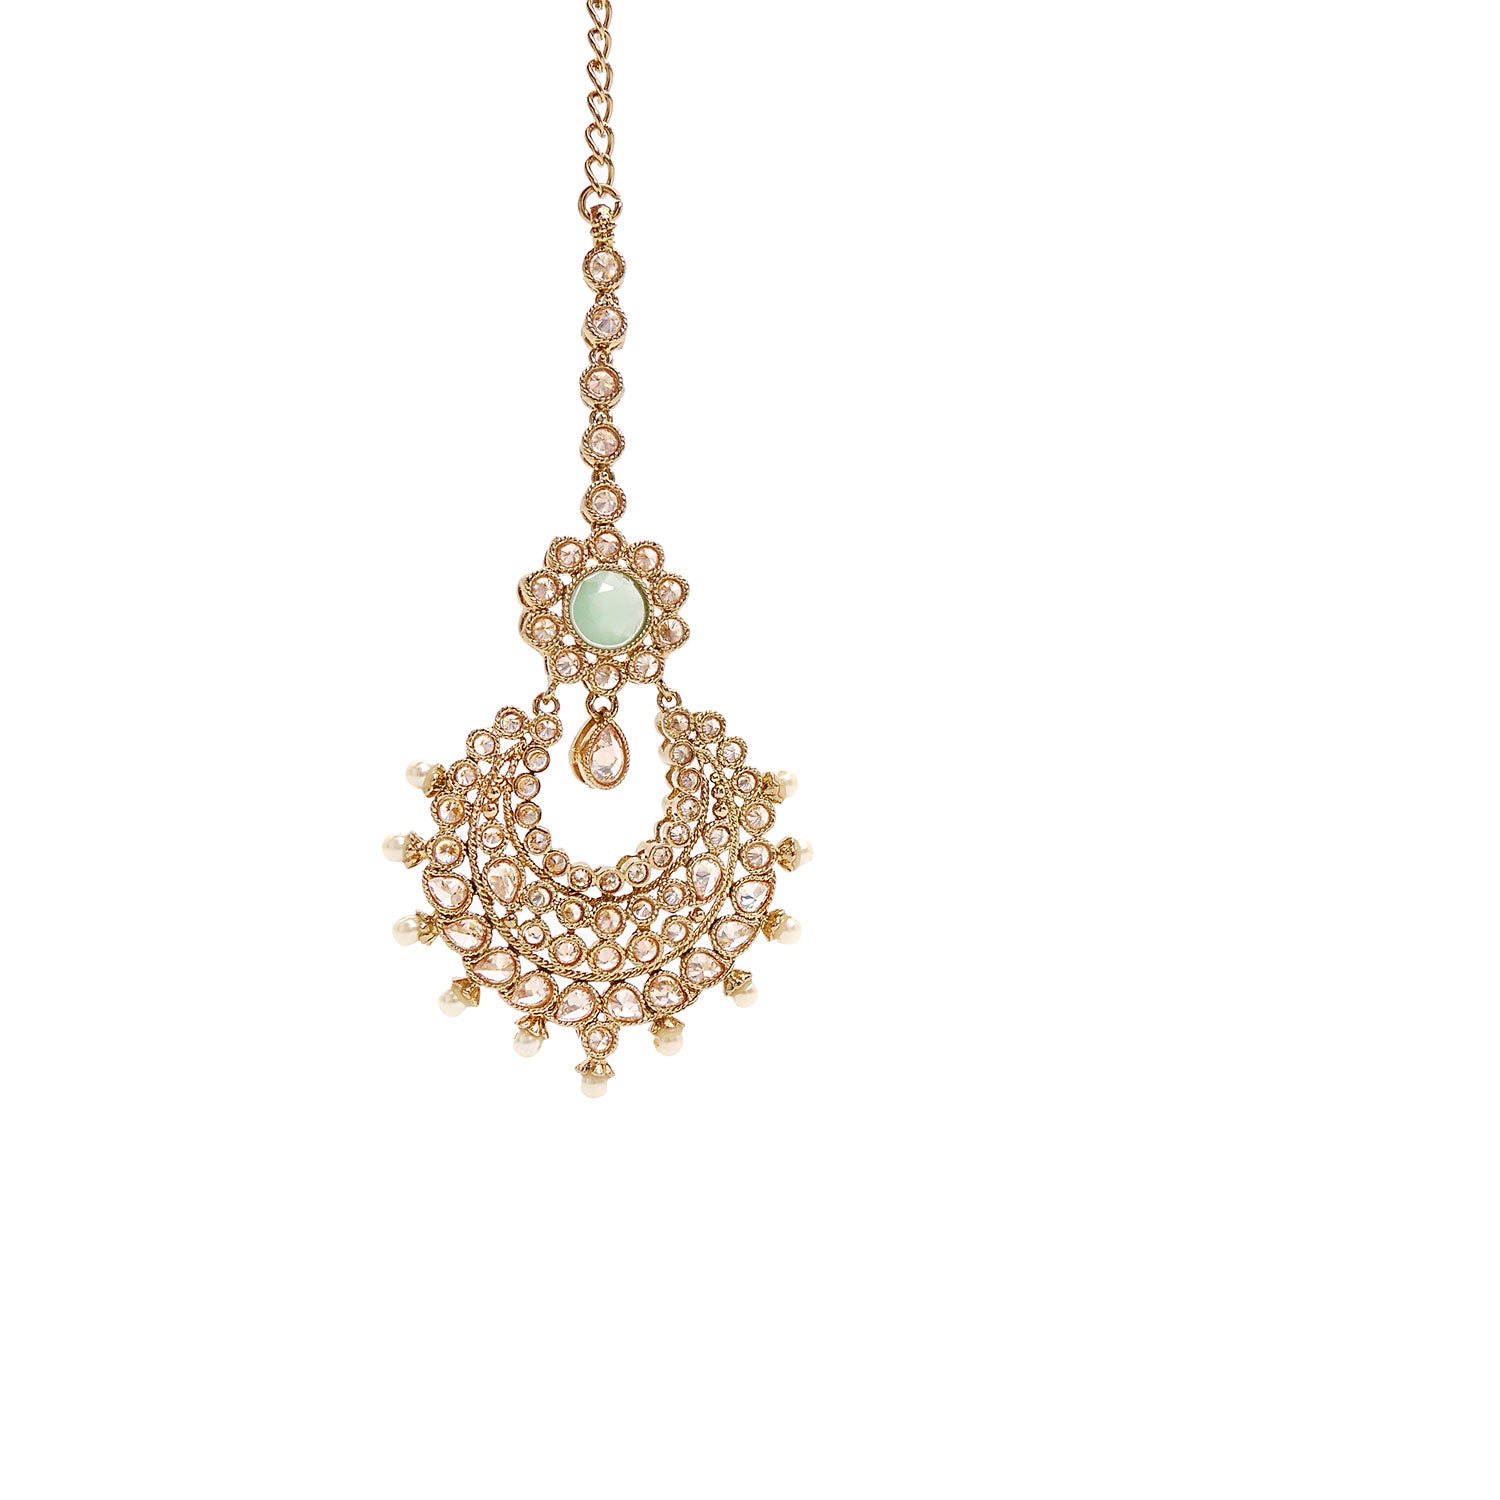 Chand Tikka in Pearl and Mint